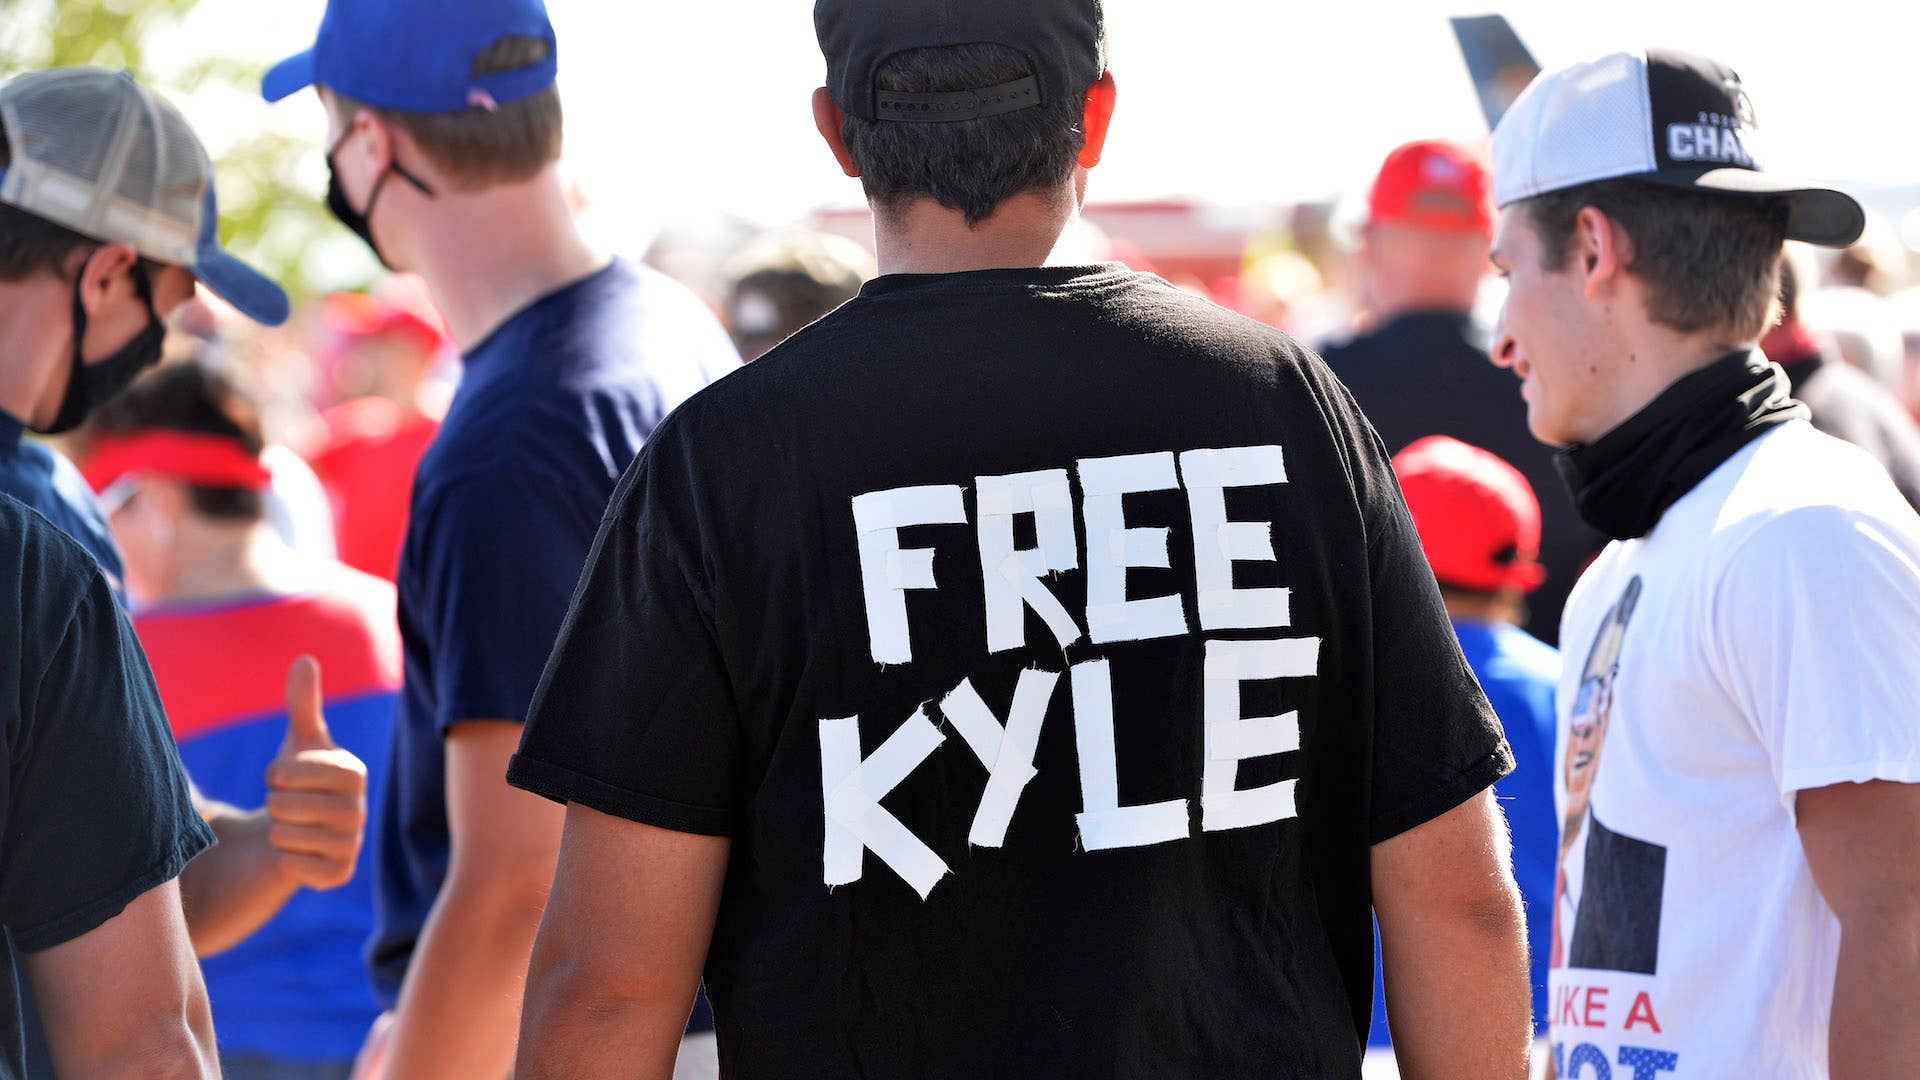 A man wears a shirt calling for freedom for Kyle Rittenhouse.